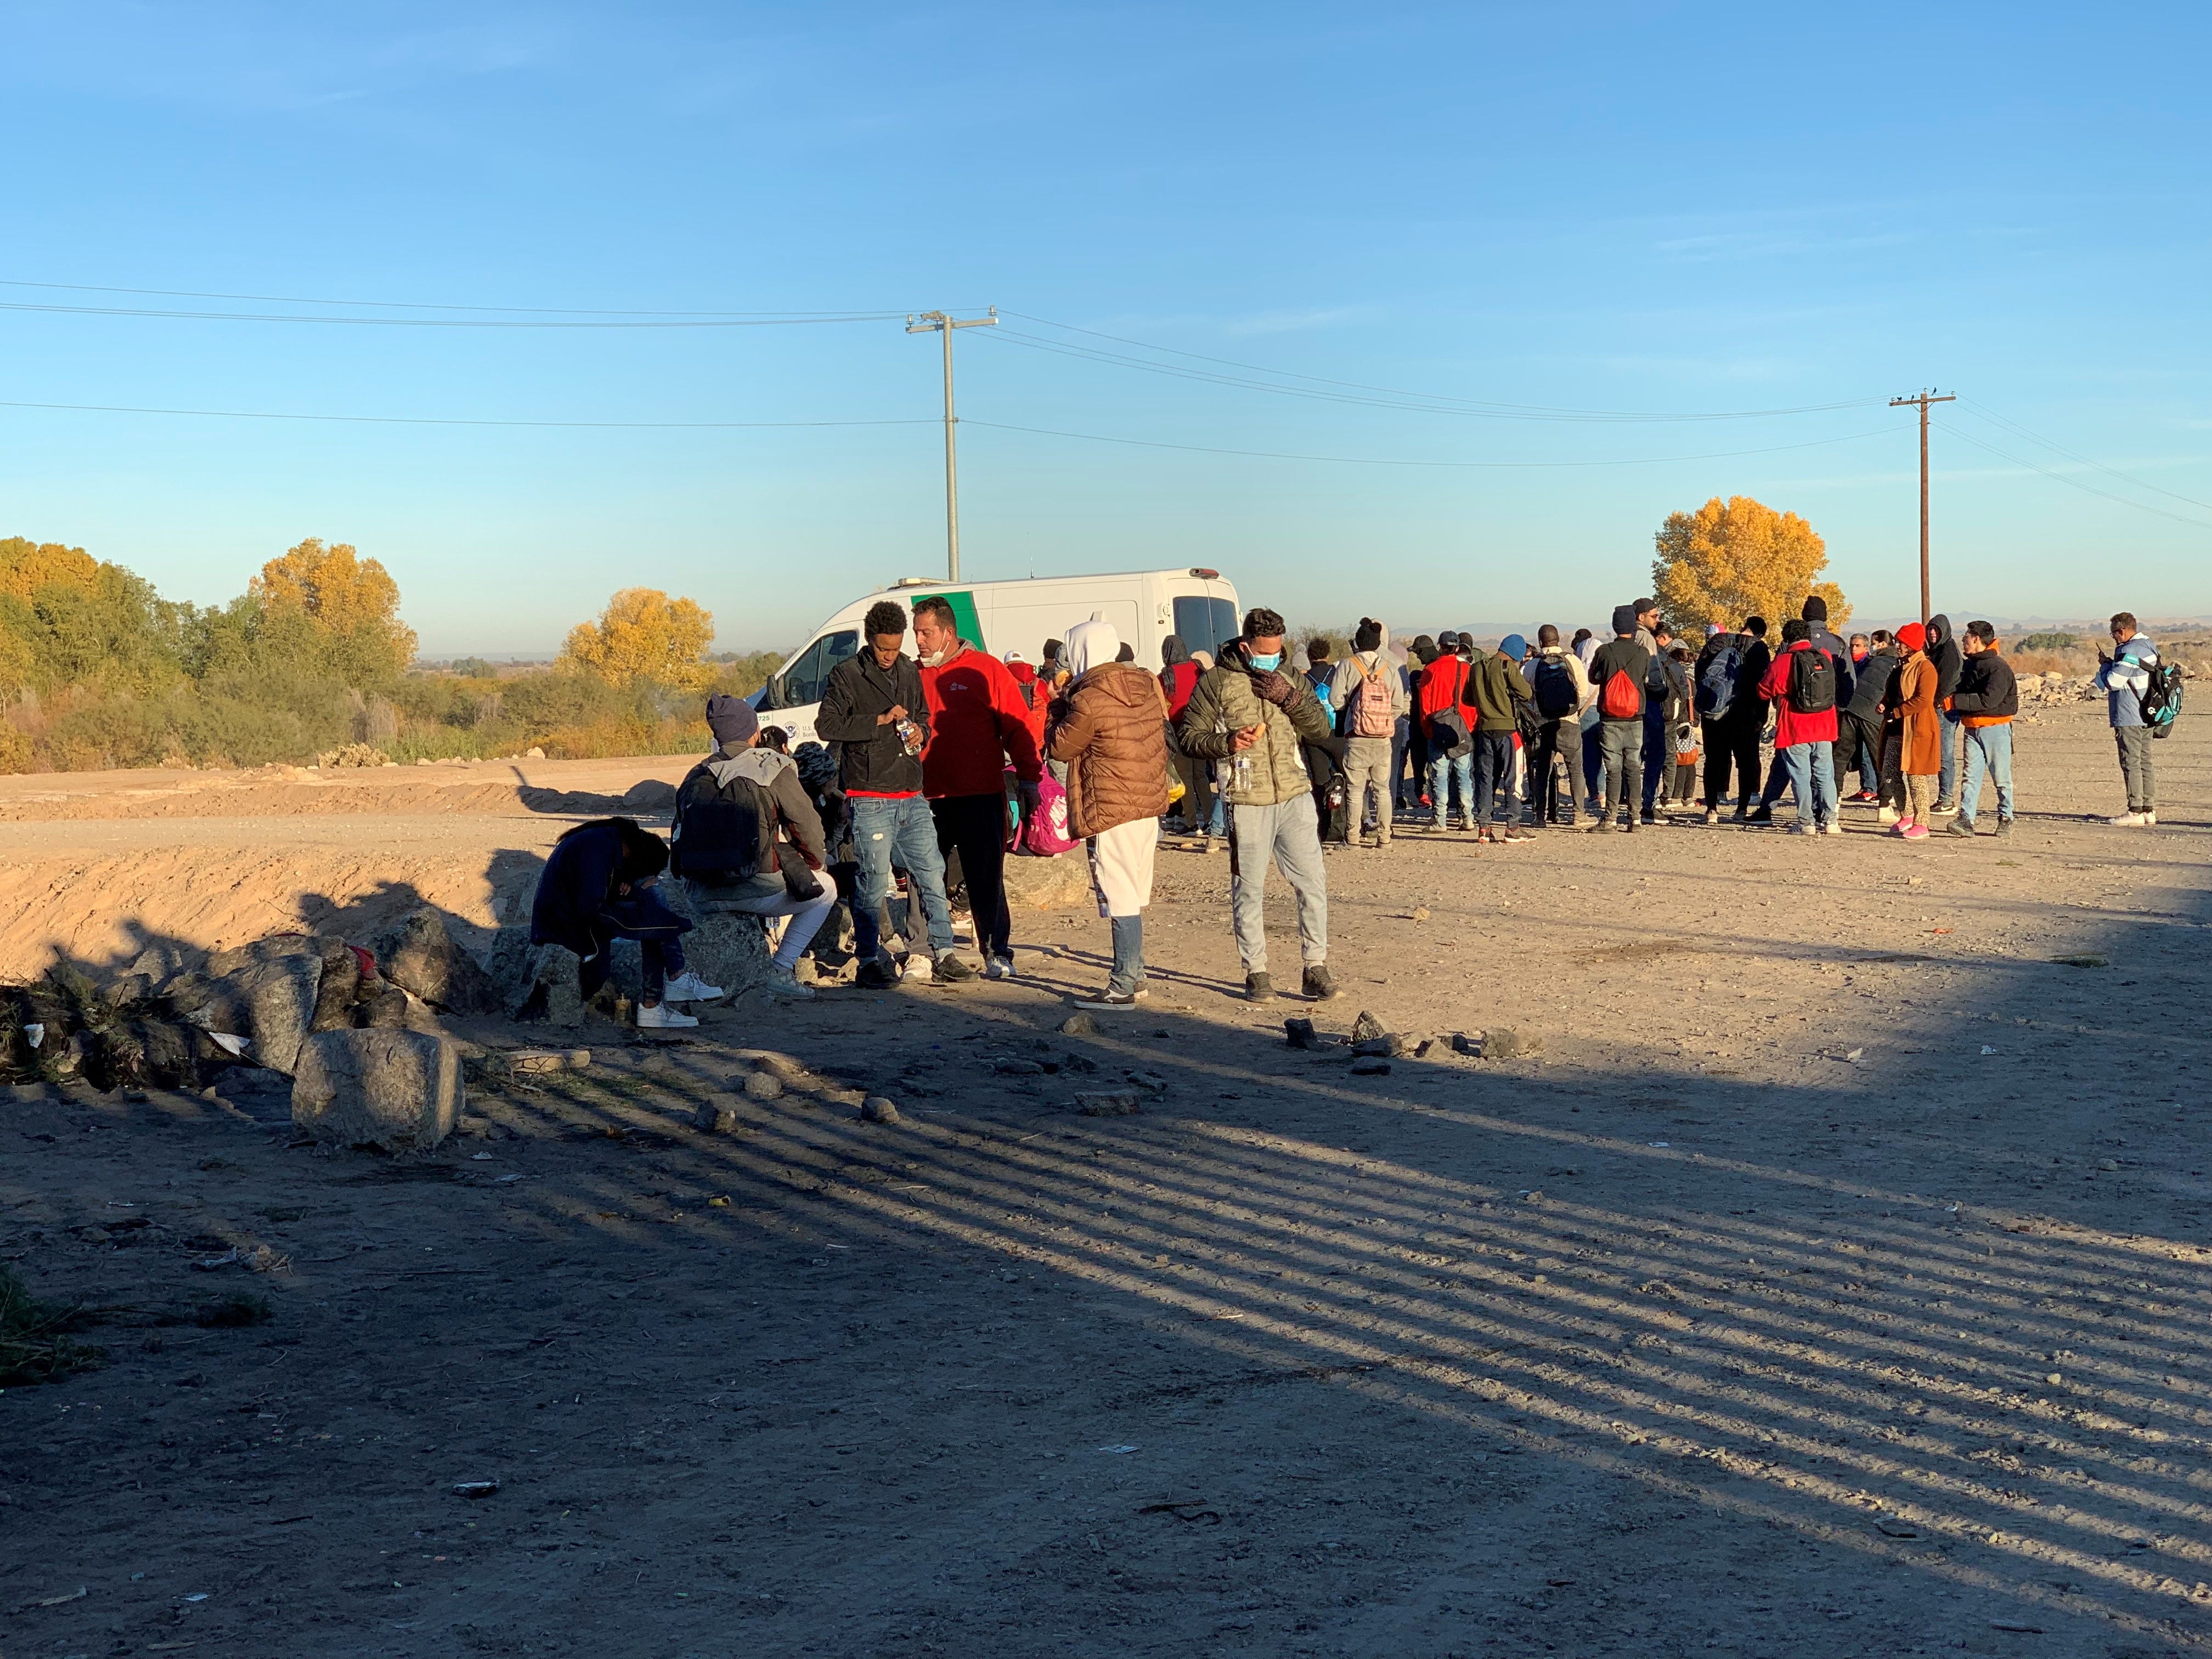 Migrants from many countries are arriving at the US-Mexico border. Here's why